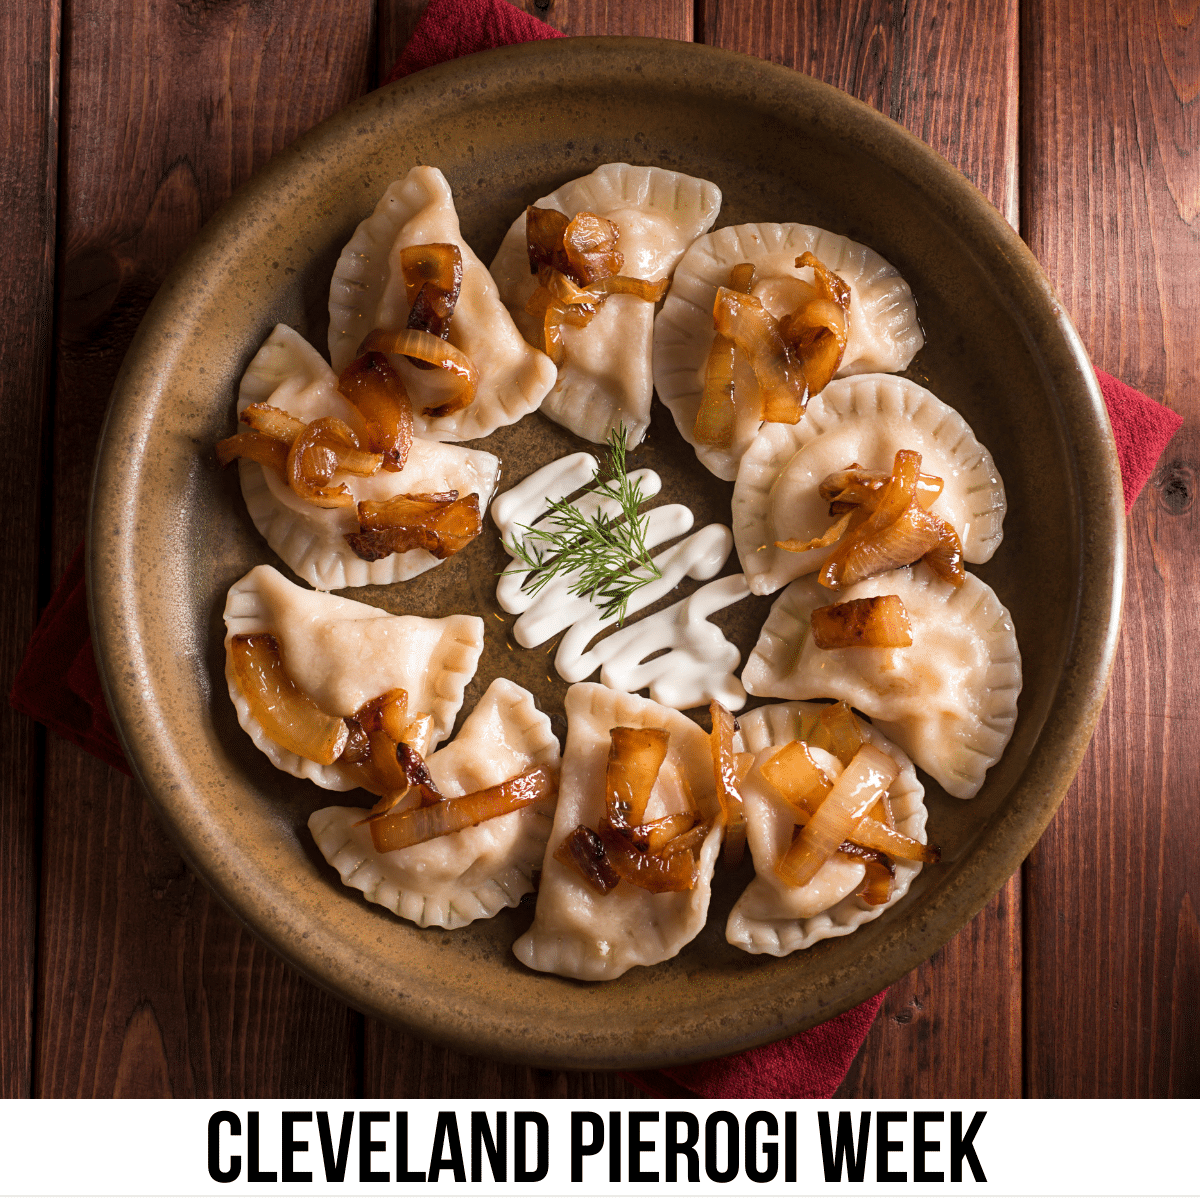 square image with a photo of a plate of 9 pierogi arranged in a circle around a white dip. A white strip across the bottom has the text Cleveland Pierogi Week